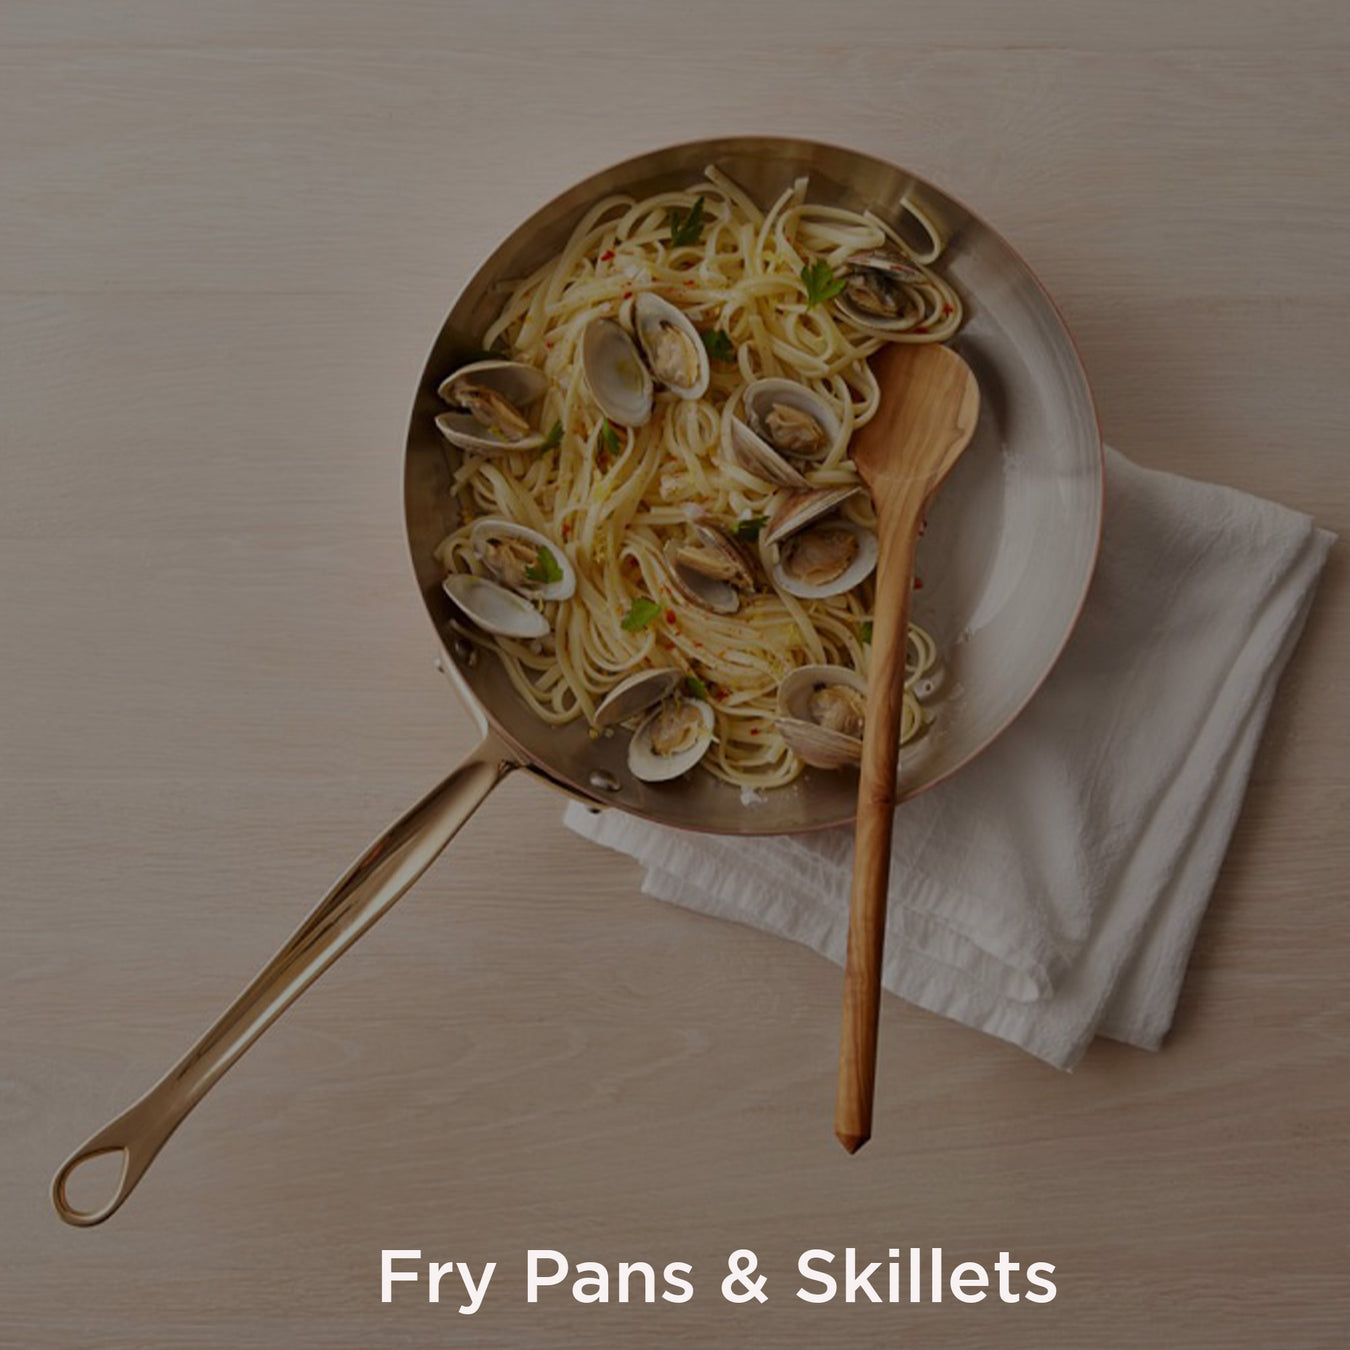 Mauviel Fry Pans & Skillets